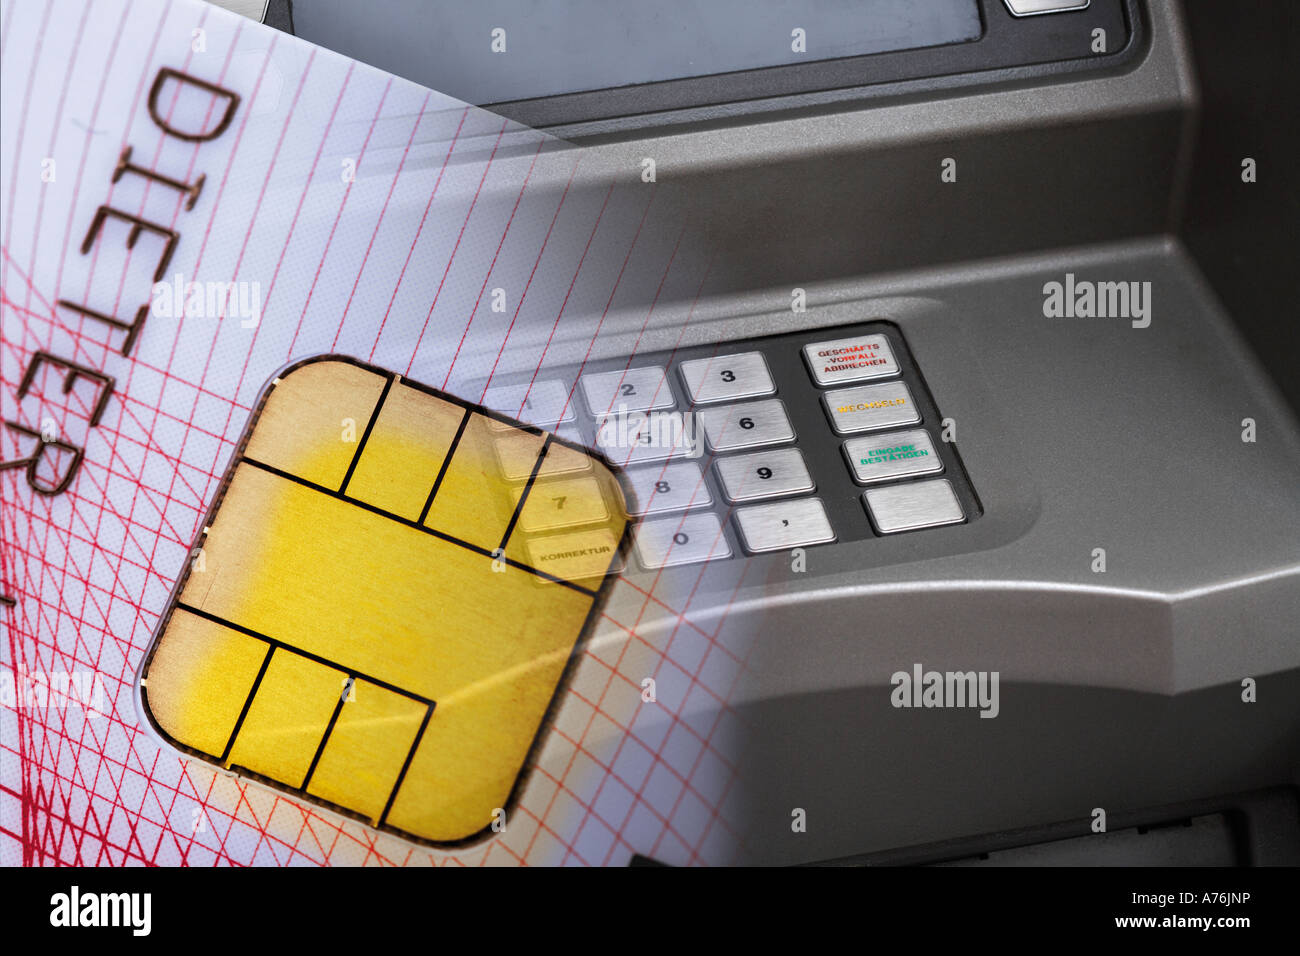 Credit card in front of cash terminal, close-up Stock Photo